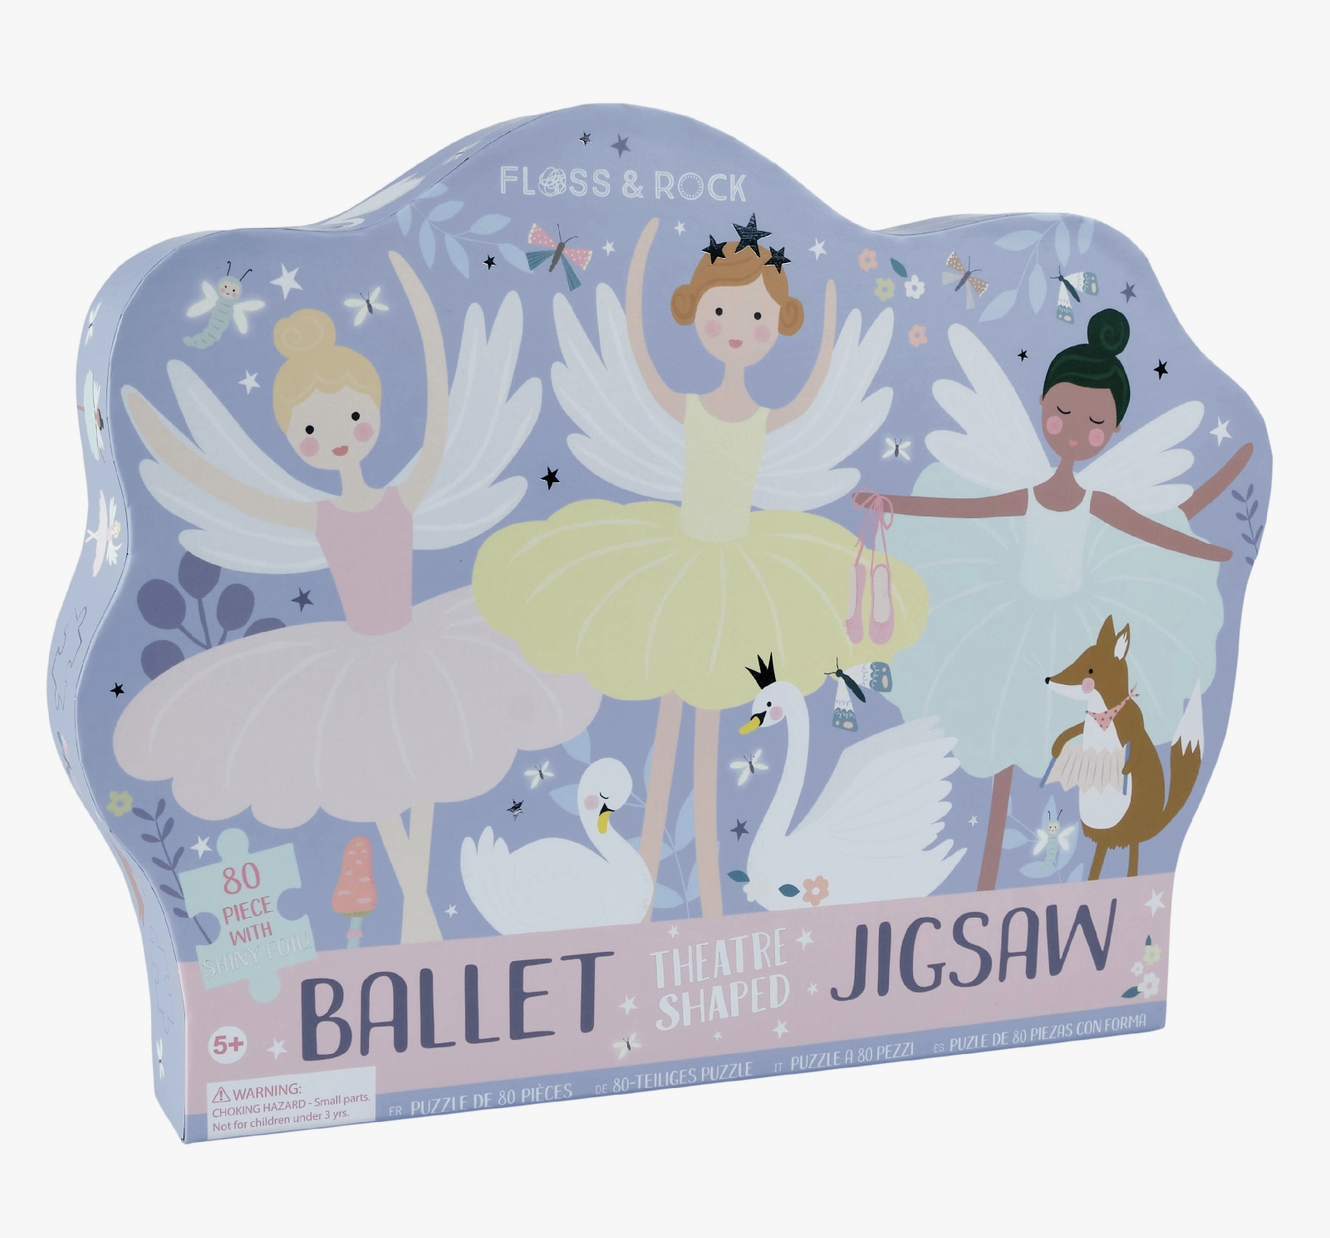 80pc "Theatre" Shaped Jigsaw with Shaped Box - Enchanted